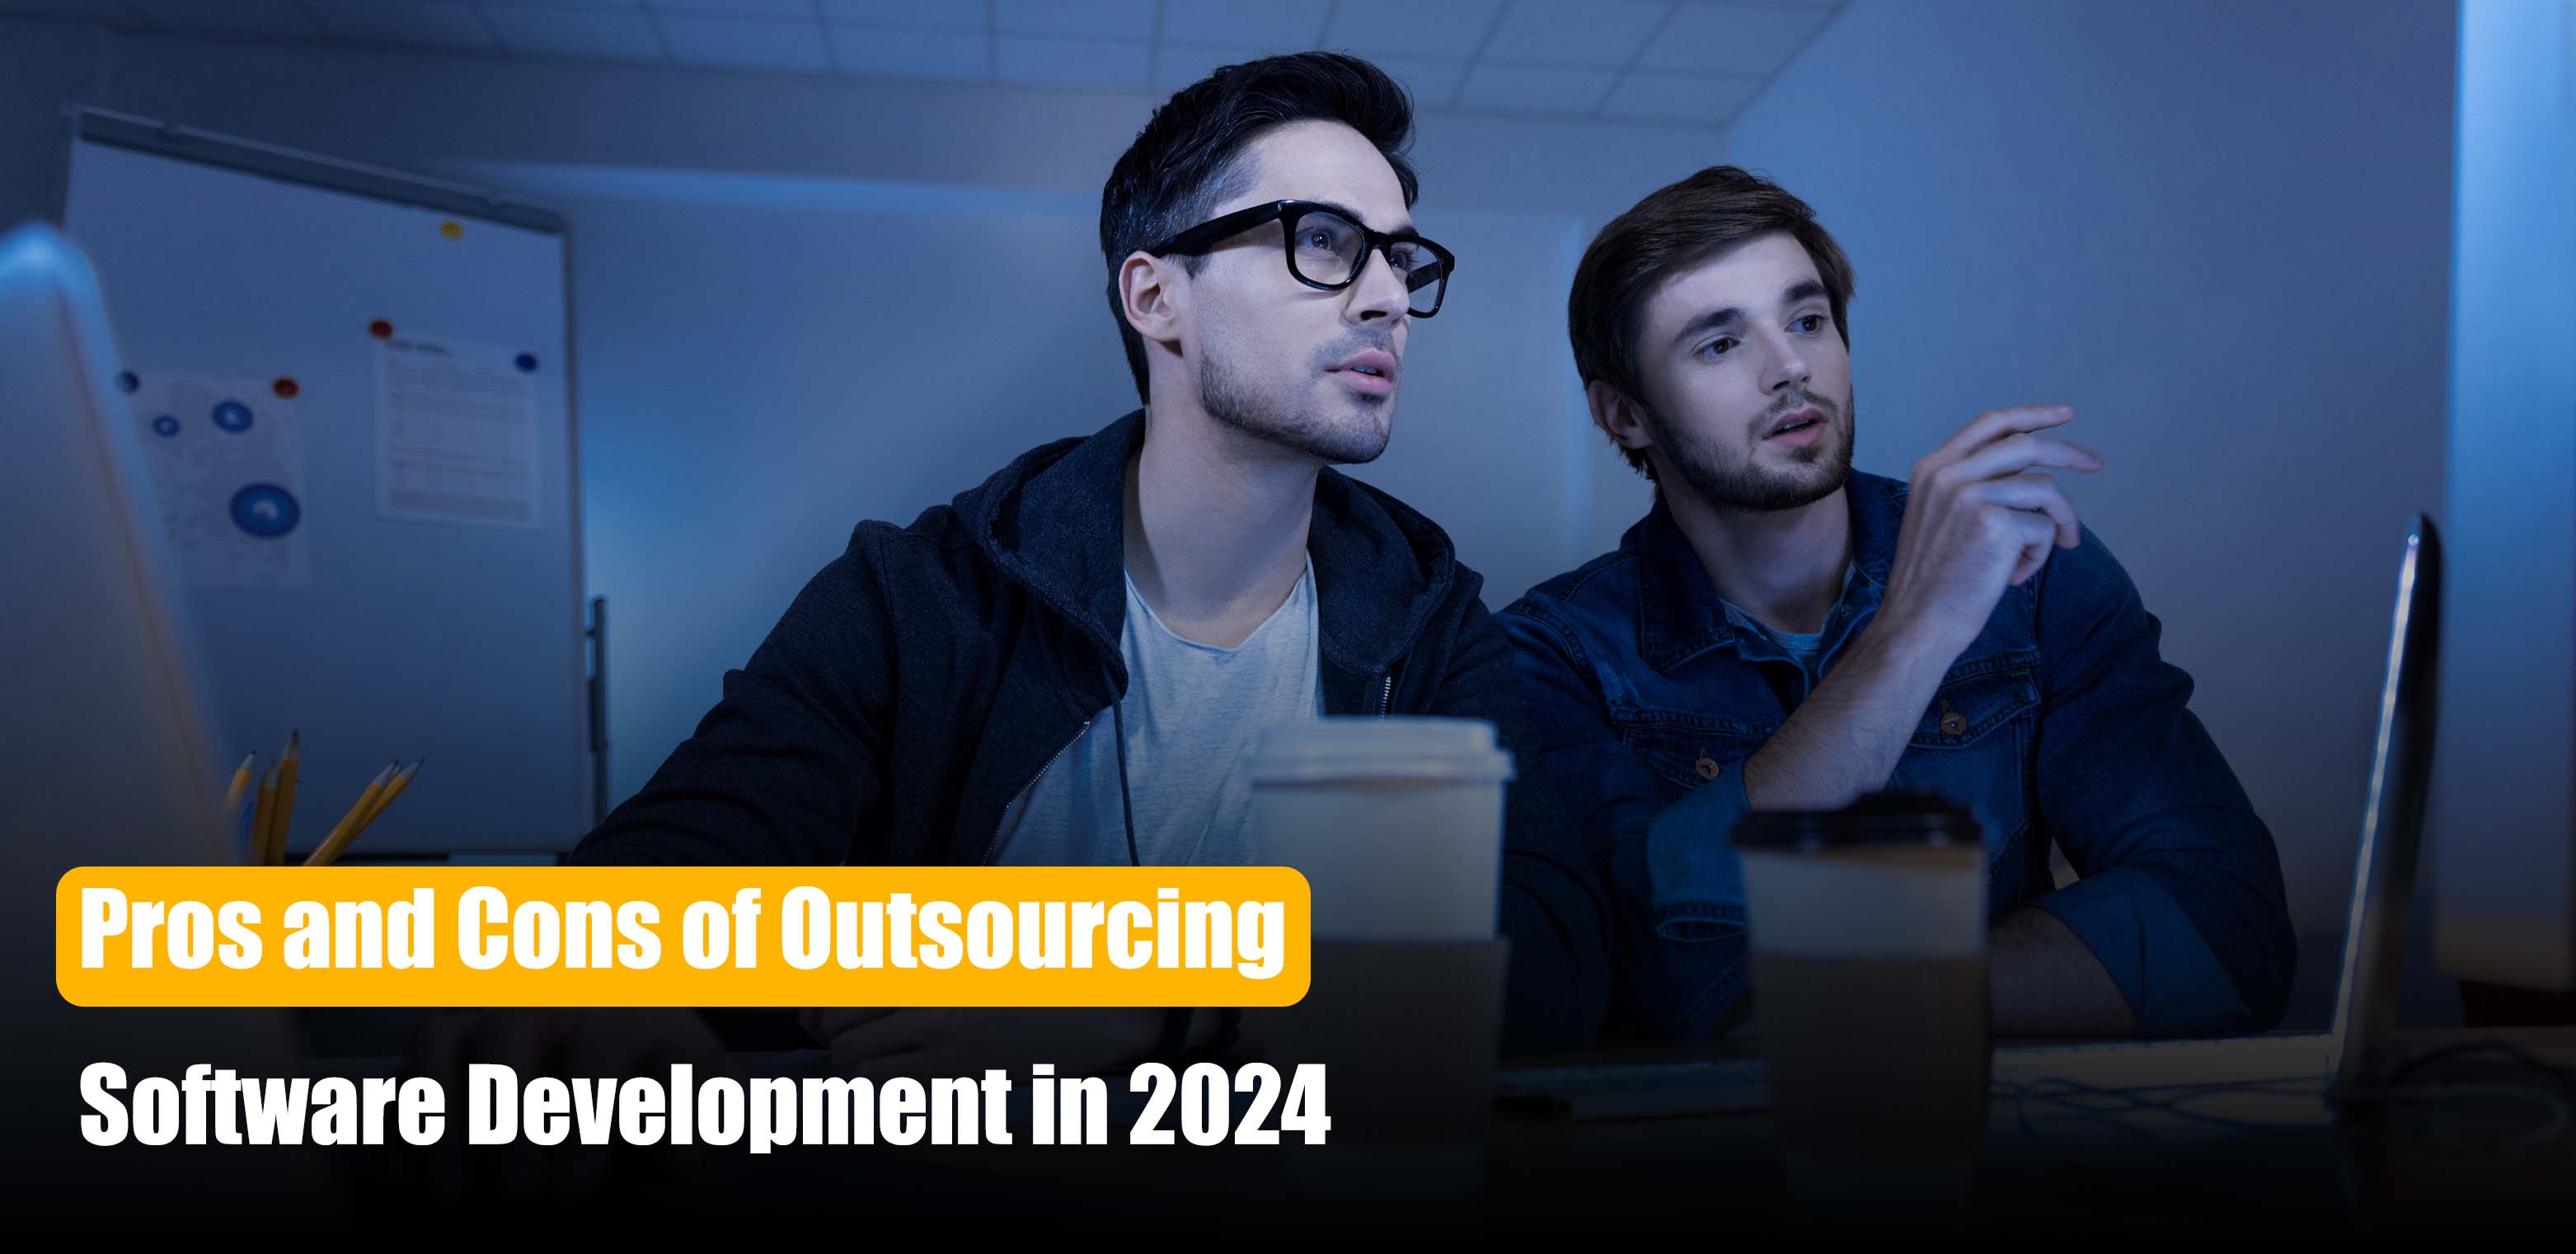 Pros and Cons of Outsourcing Software Development in 2024